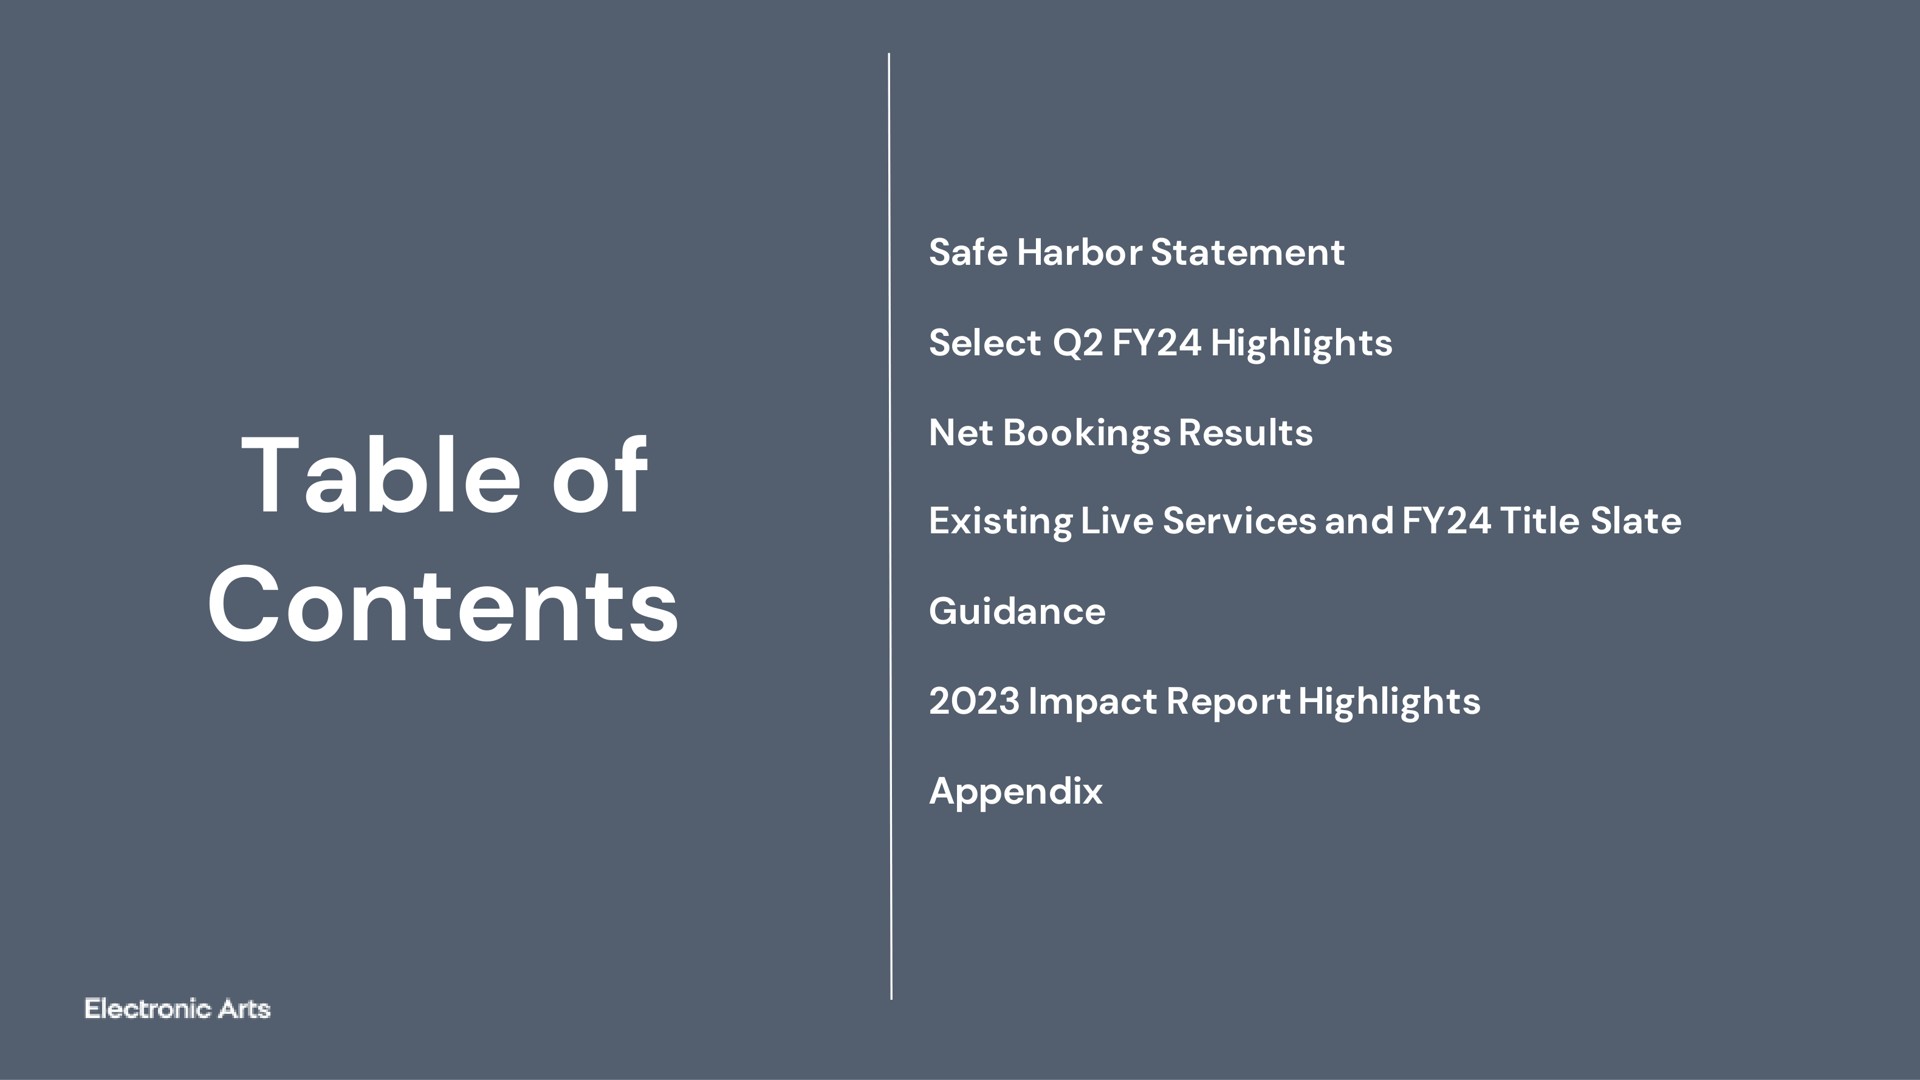 table of contents safe harbor statement select highlights net bookings results existing live services and title slate guidance impact report highlights appendix | Electronic Arts